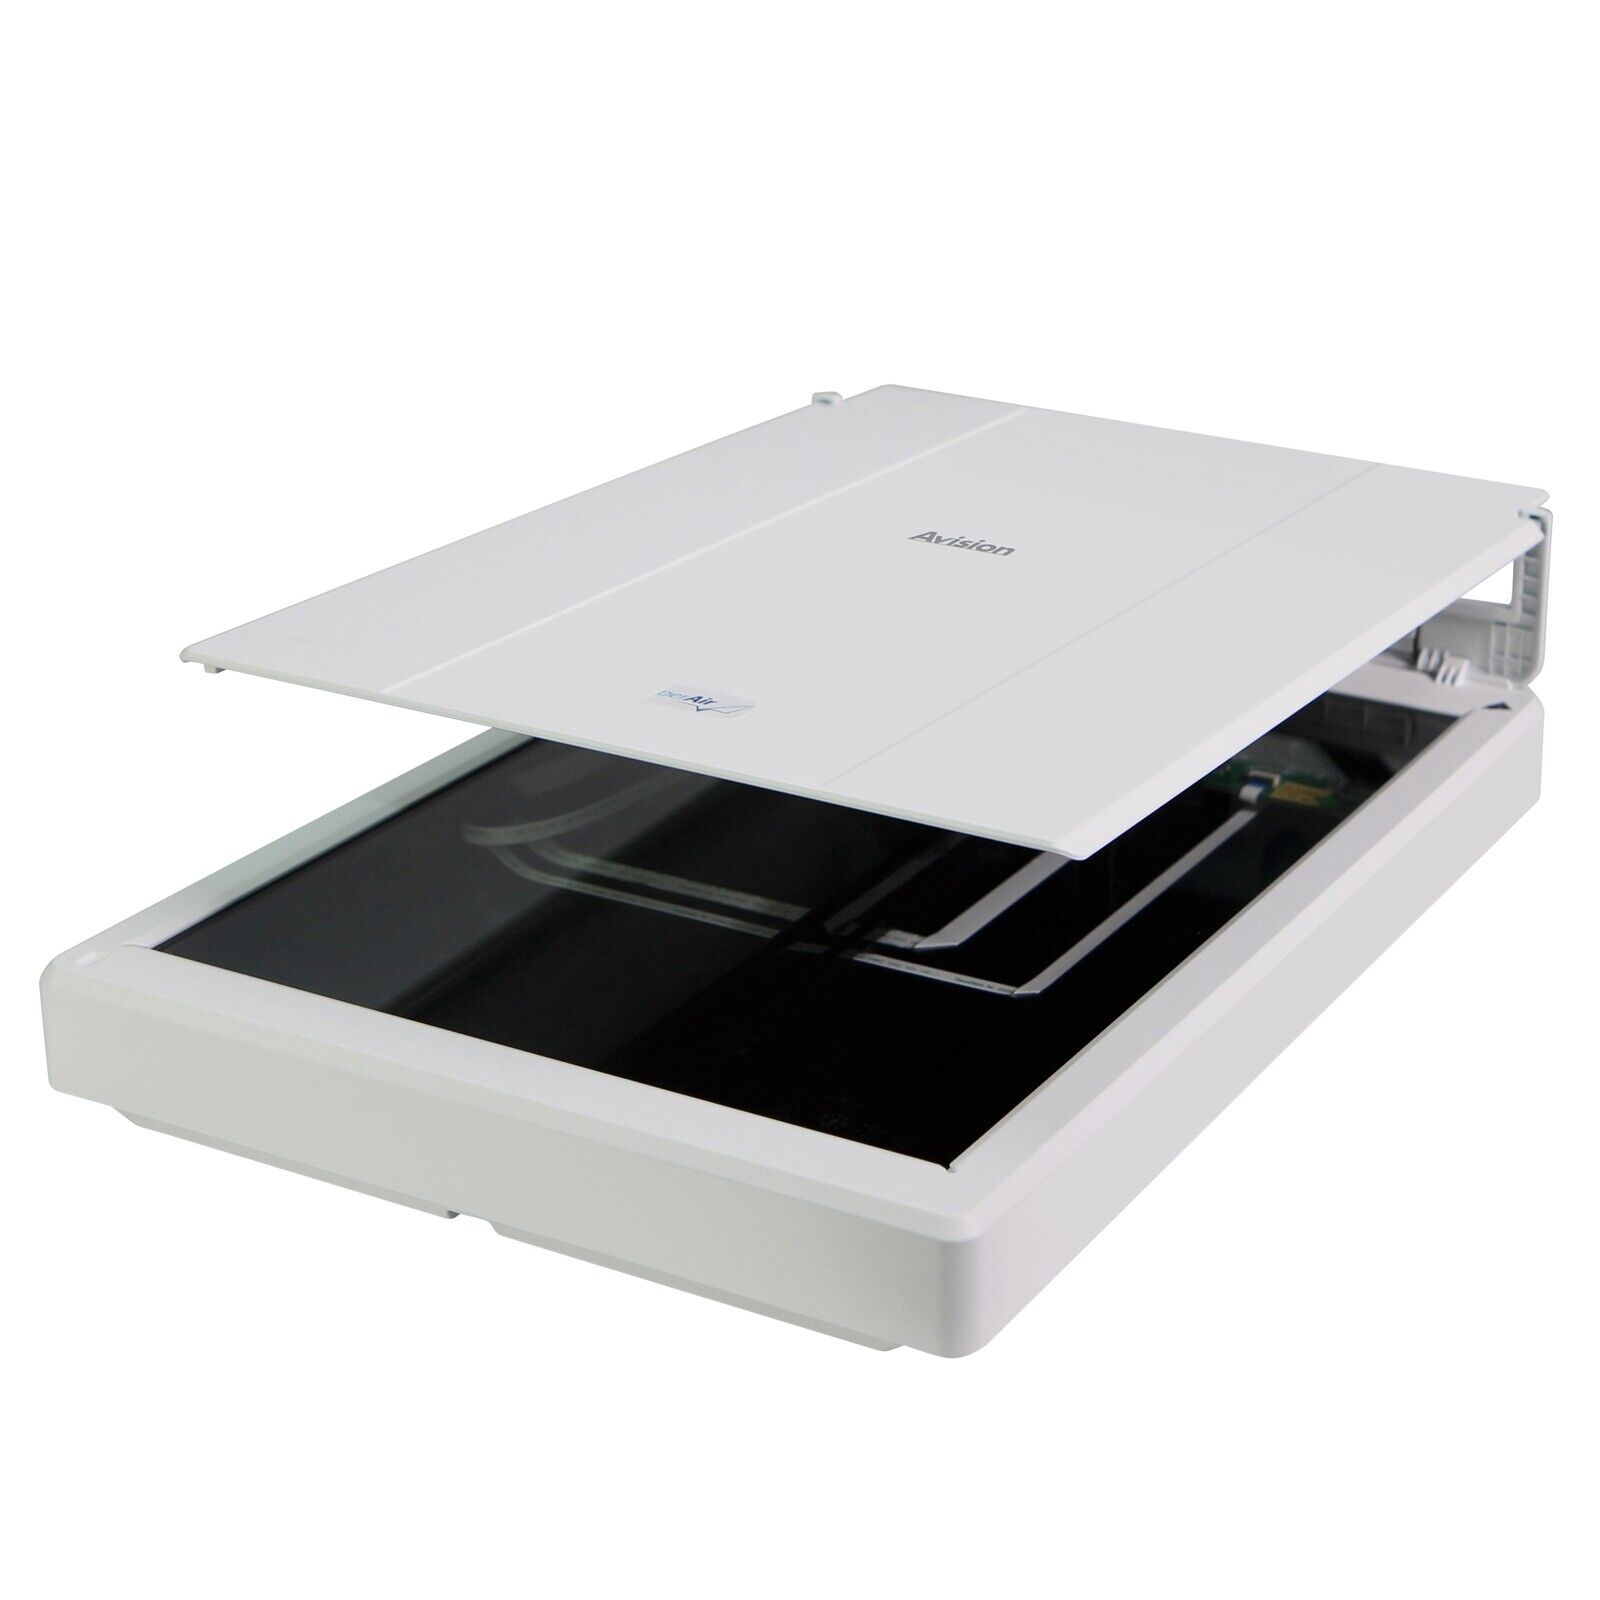 Avision PaperAir 10 Flatbed-Scanner inkl.PaperManager